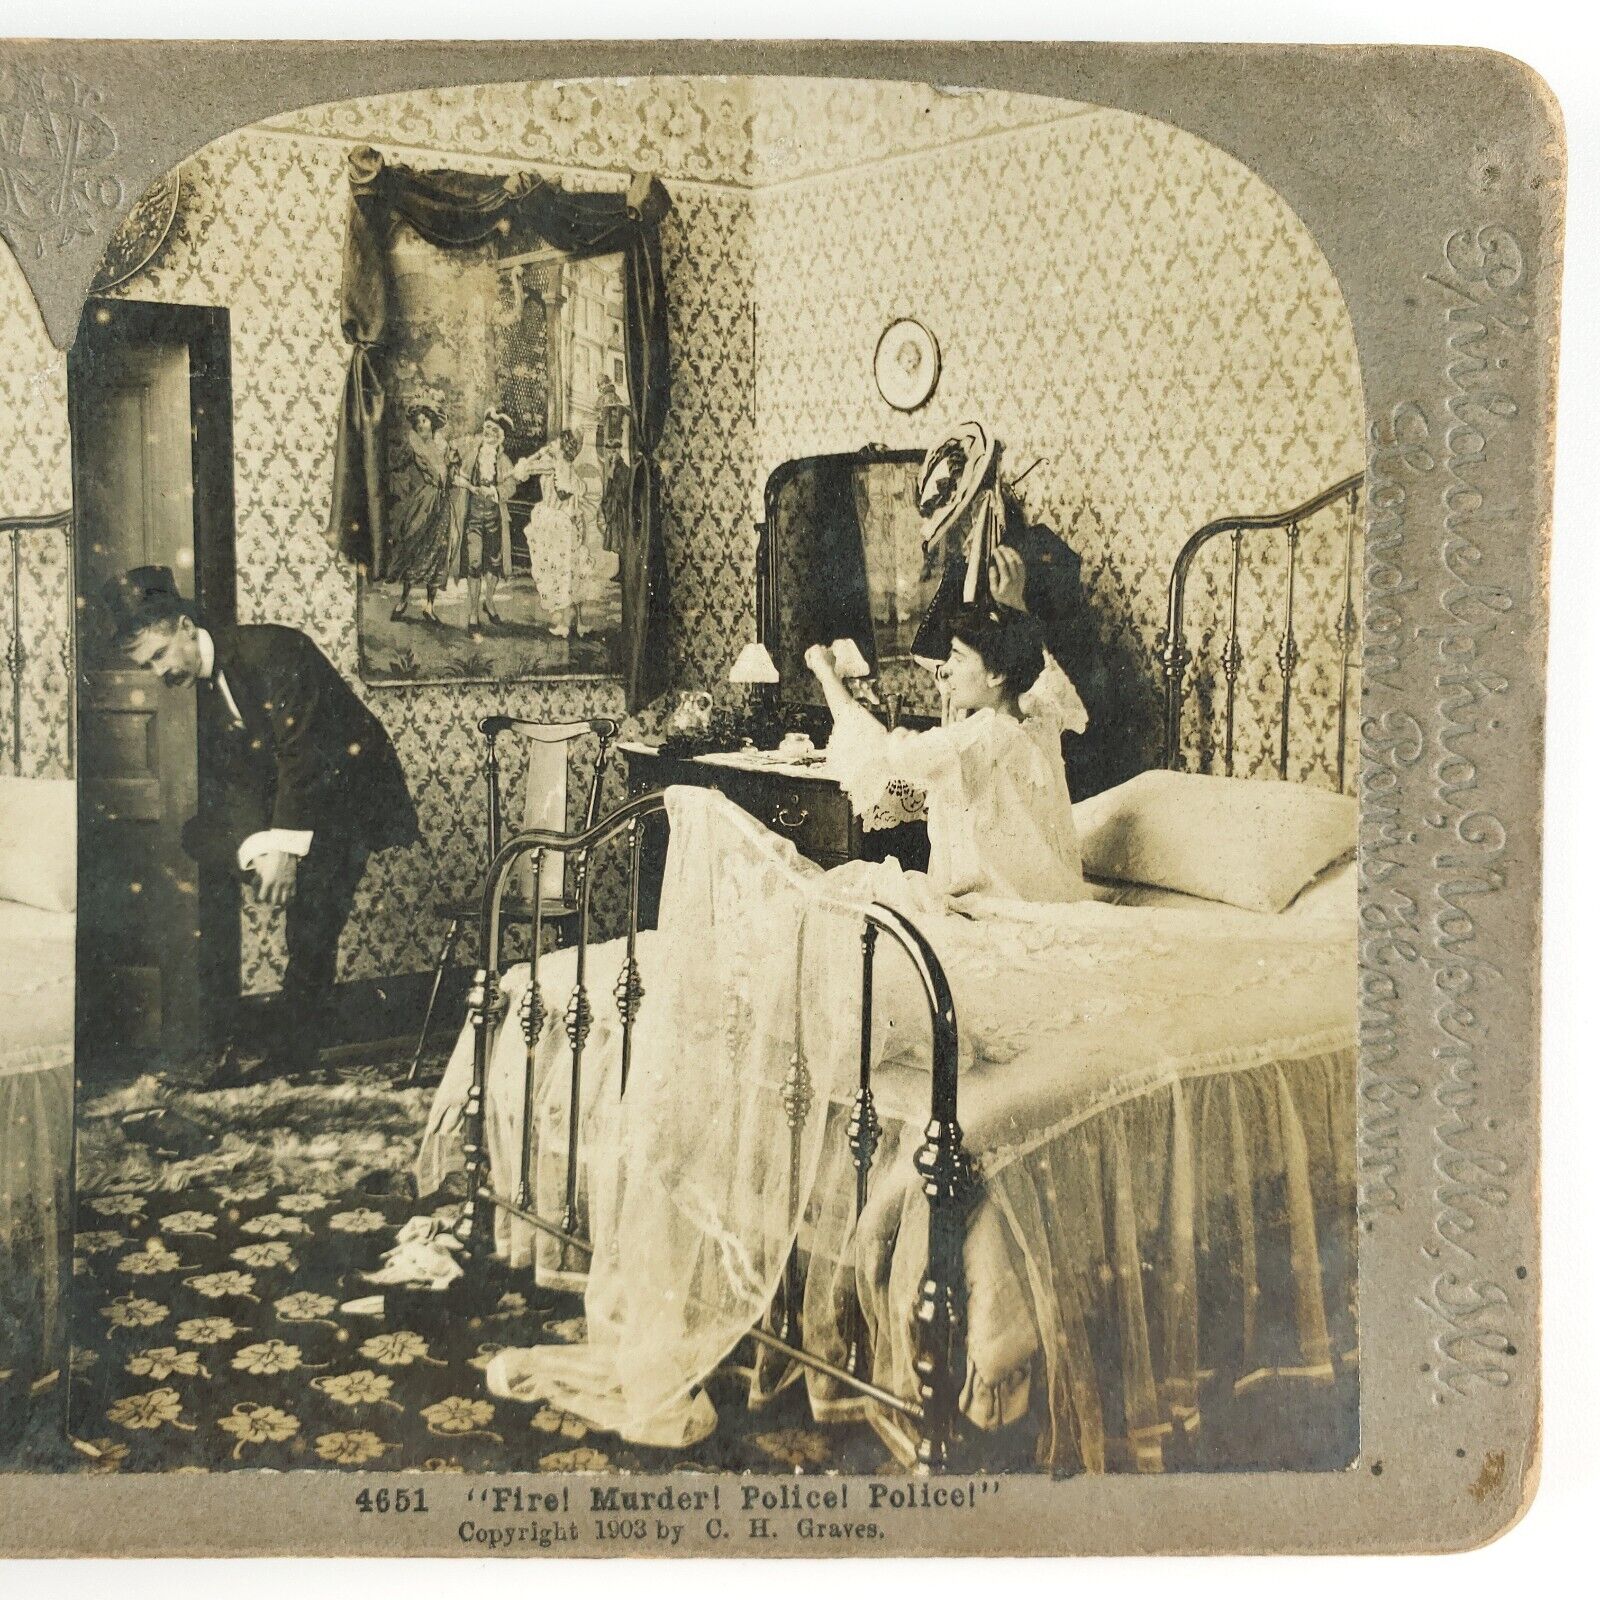 Drunk Man In Wrong Bedroom Stereoview c1903 Undressed Lady Bed Young Woman A1828